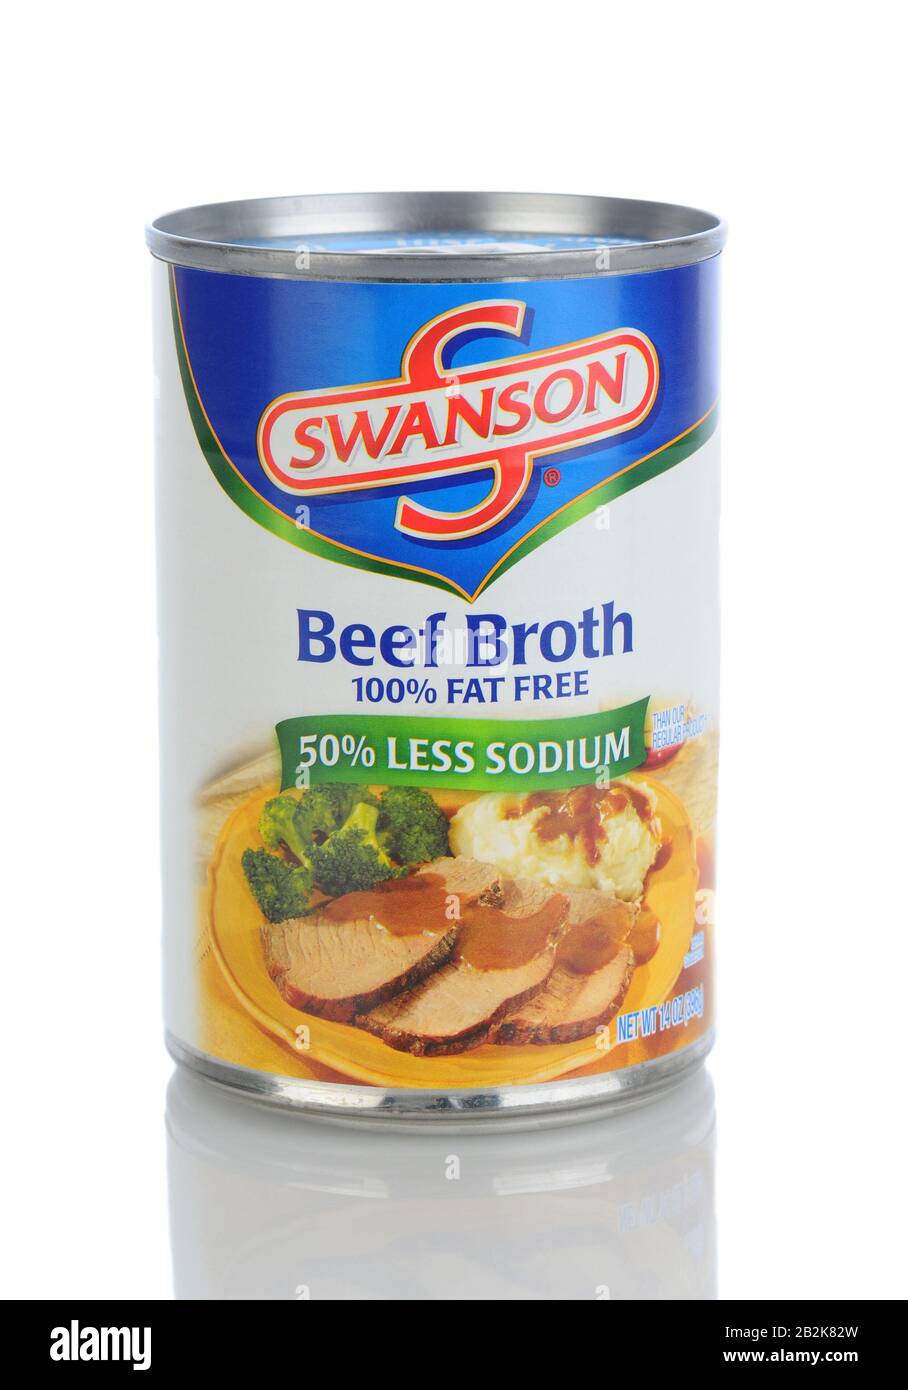 IRVINE, CA - January 11, 2013: A 1.5 ounce can of Swanson Beef Broth. Introuduced in the early 1900's the Swanson brand is currently owned by the Camp Stock Photo